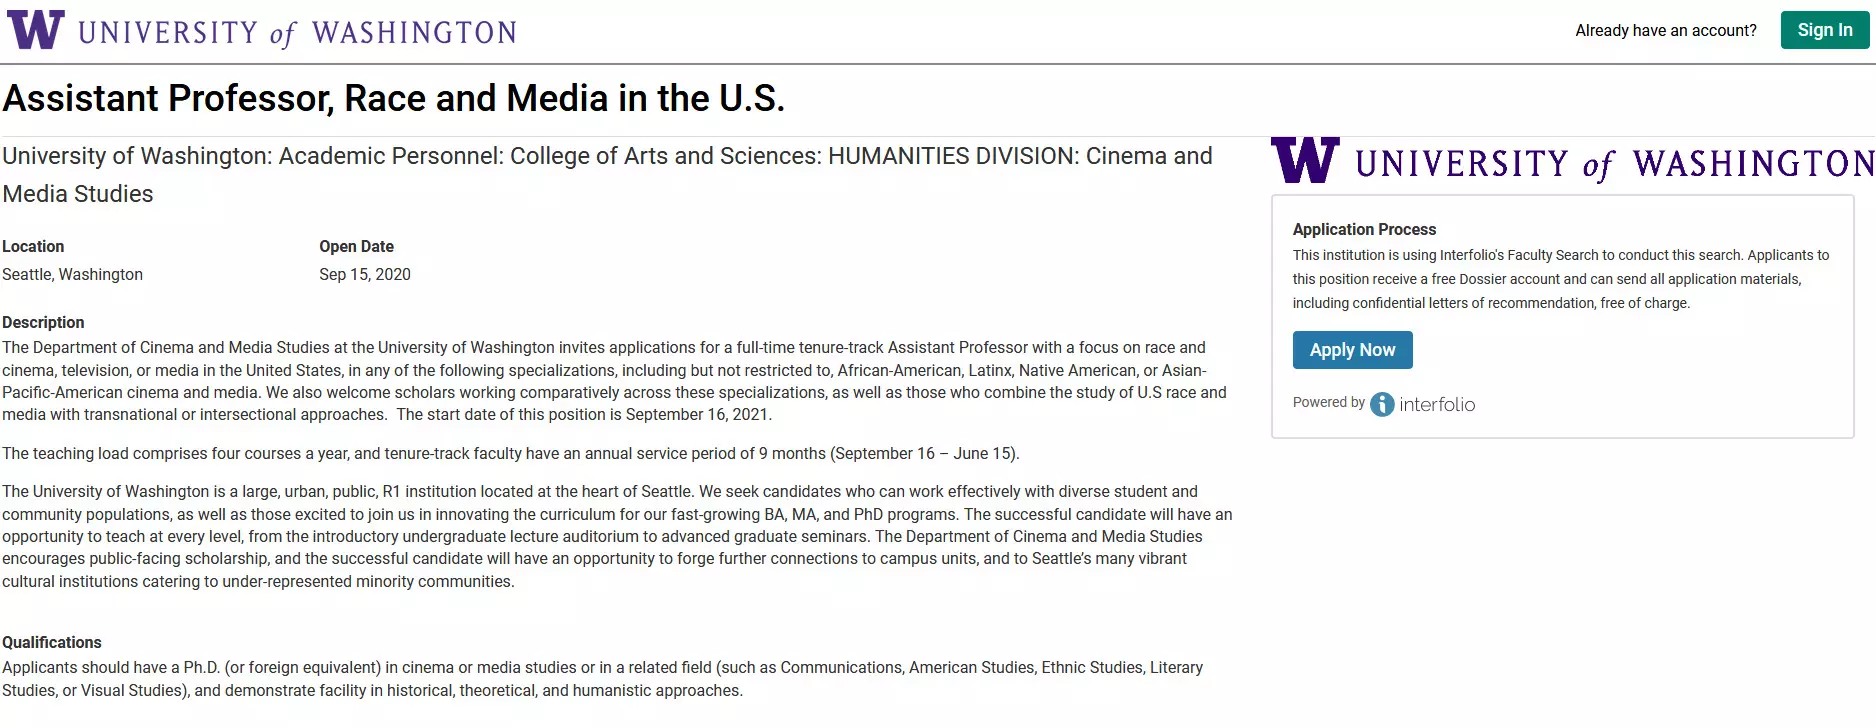 Assistant Professor, Race and Media in the U.S.University of Washington Department of Cinema and Media Studies